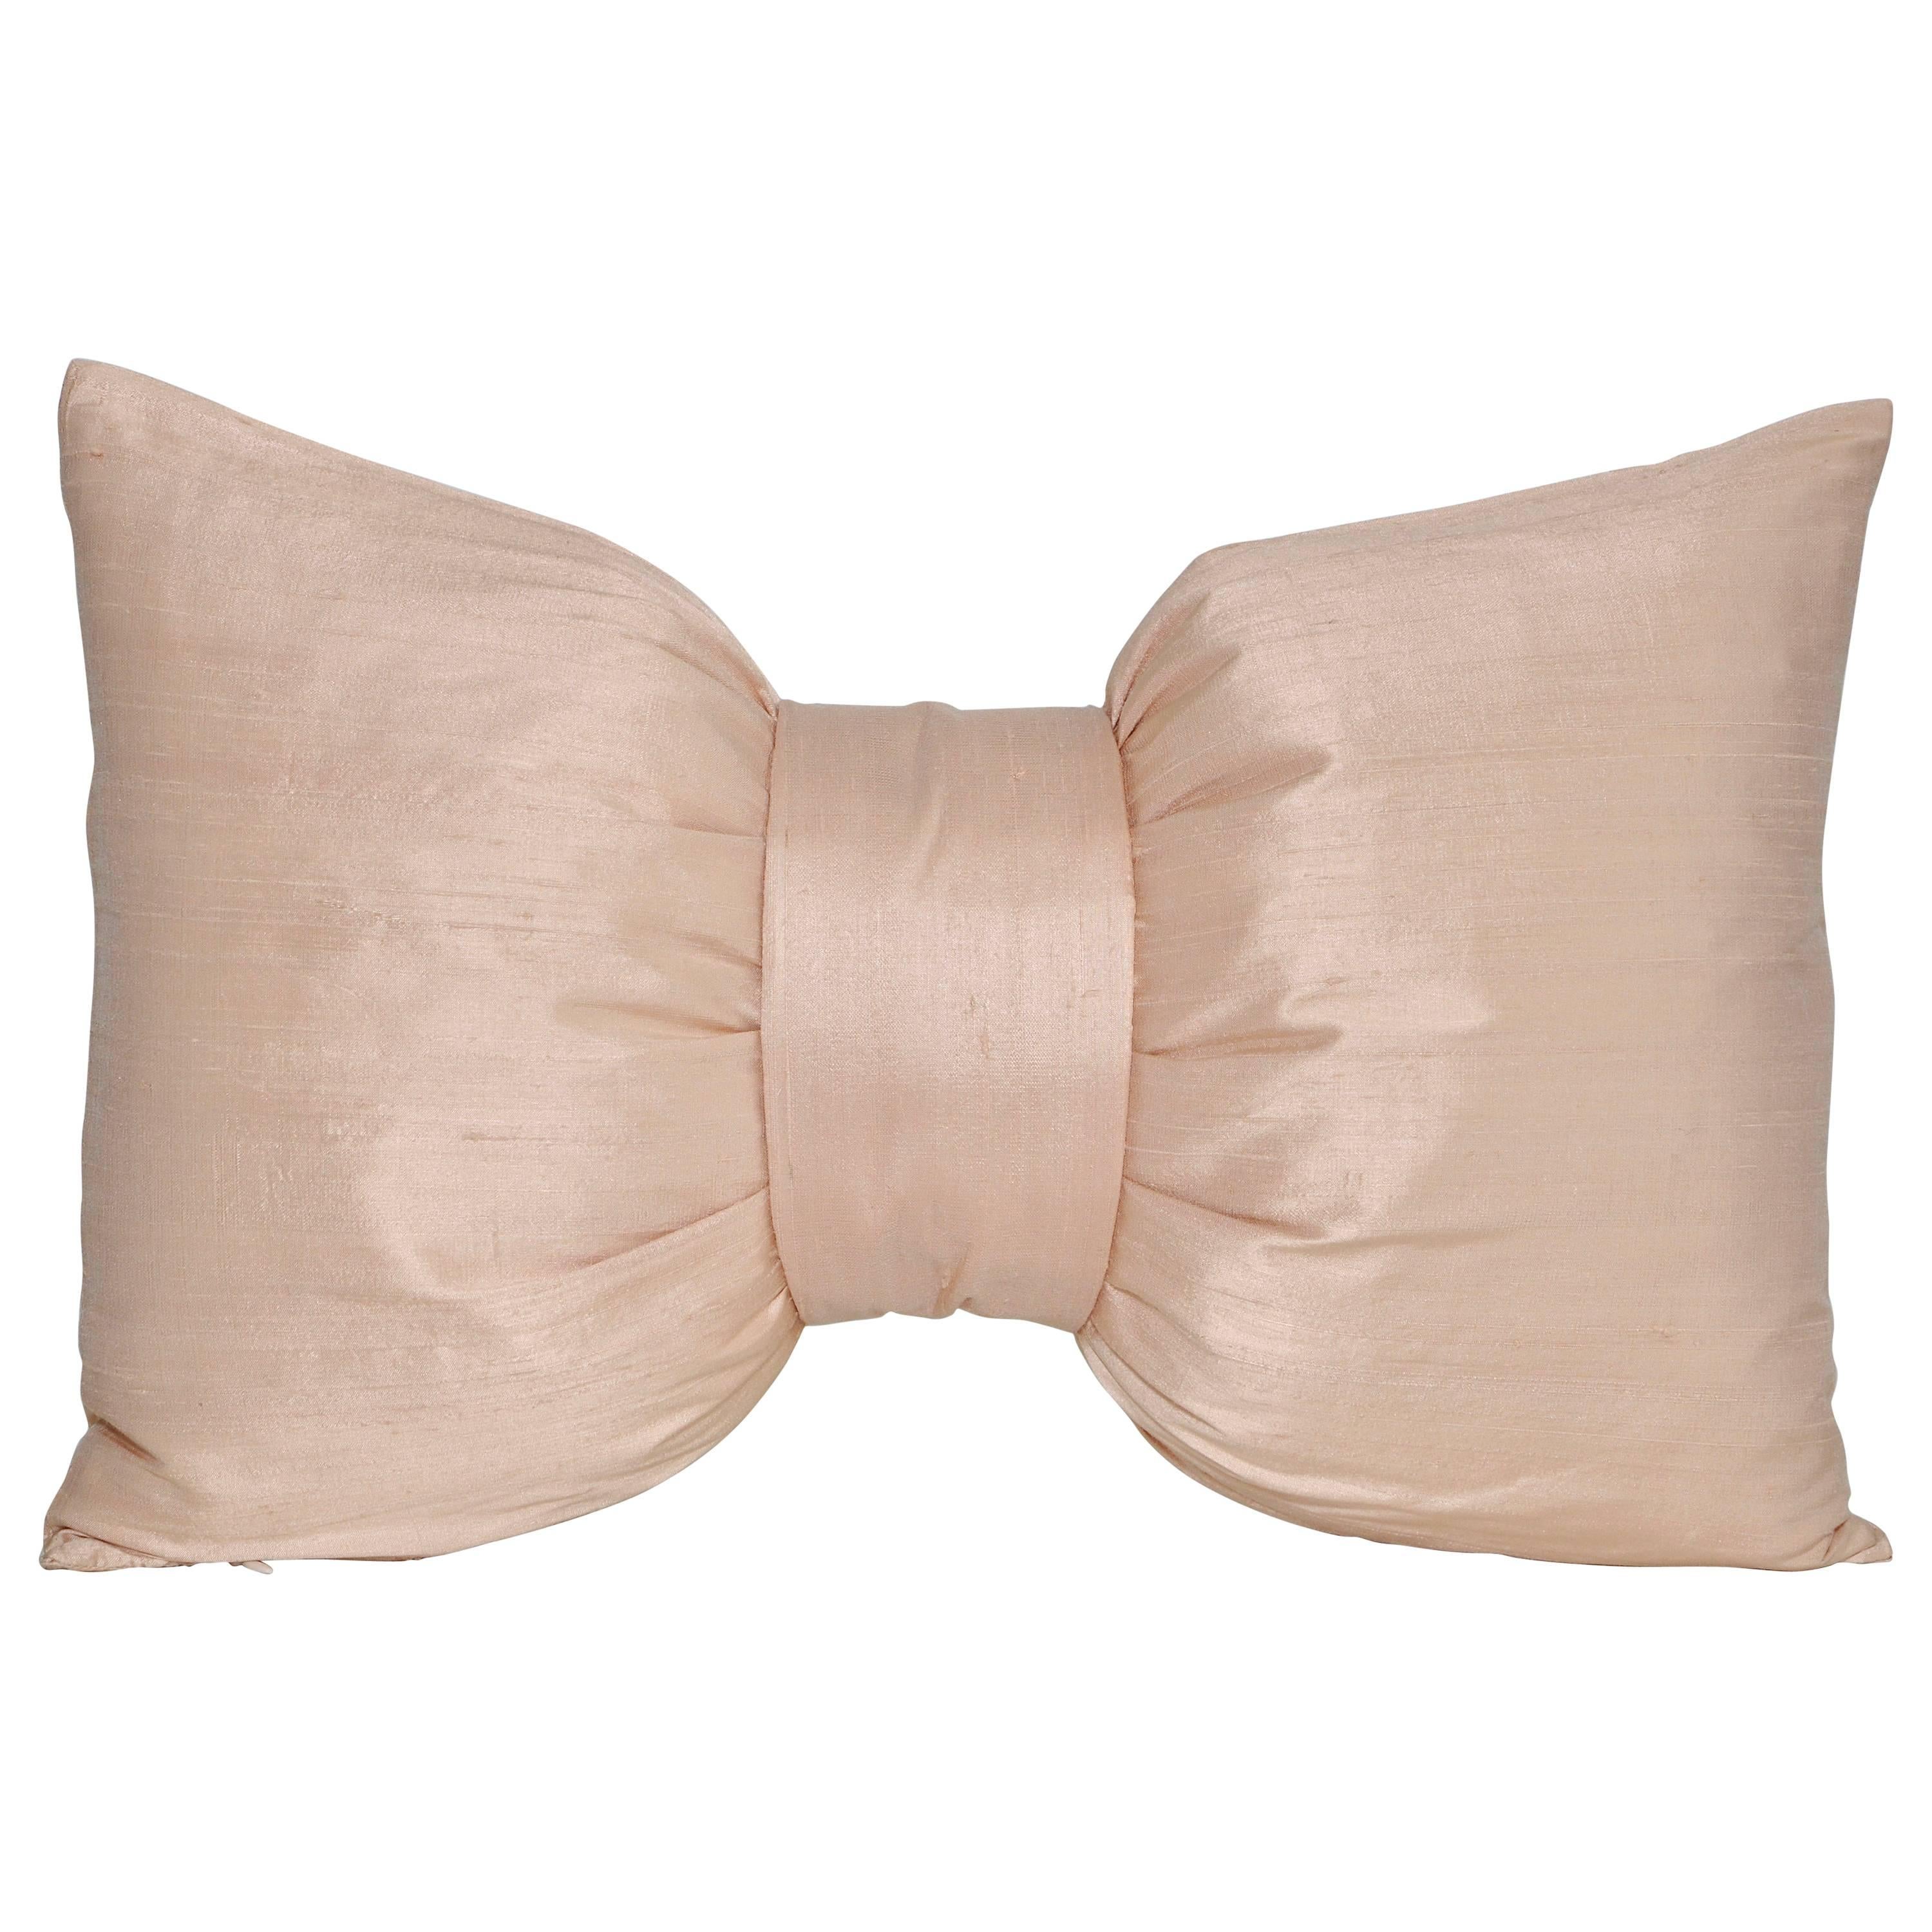 Large, French Antique Pink Peach Silk Bow Cushion Pillow For Sale